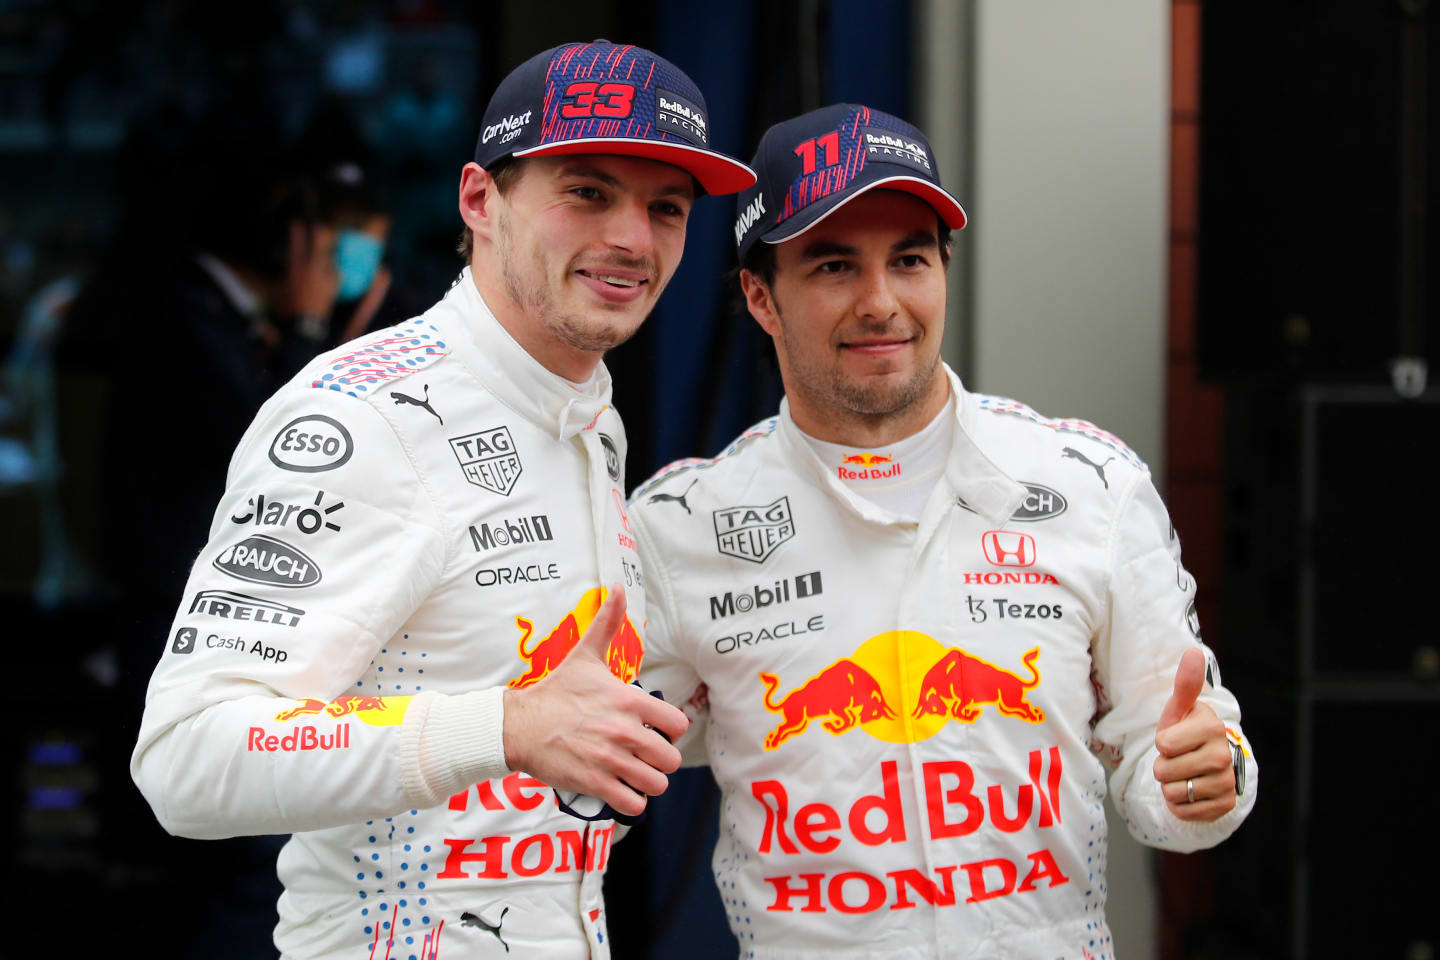 ISTANBUL, TURKEY - OCTOBER 10: Second placed Max Verstappen of Netherlands and Red Bull Racing and third placed Sergio Perez of Mexico and Red Bull Racing celebrate in parc ferme during the F1 Grand Prix of Turkey at Intercity Istanbul Park on October 10, 2021 in Istanbul, Turkey. (Photo by Umit Bektas - Pool/Getty Images)